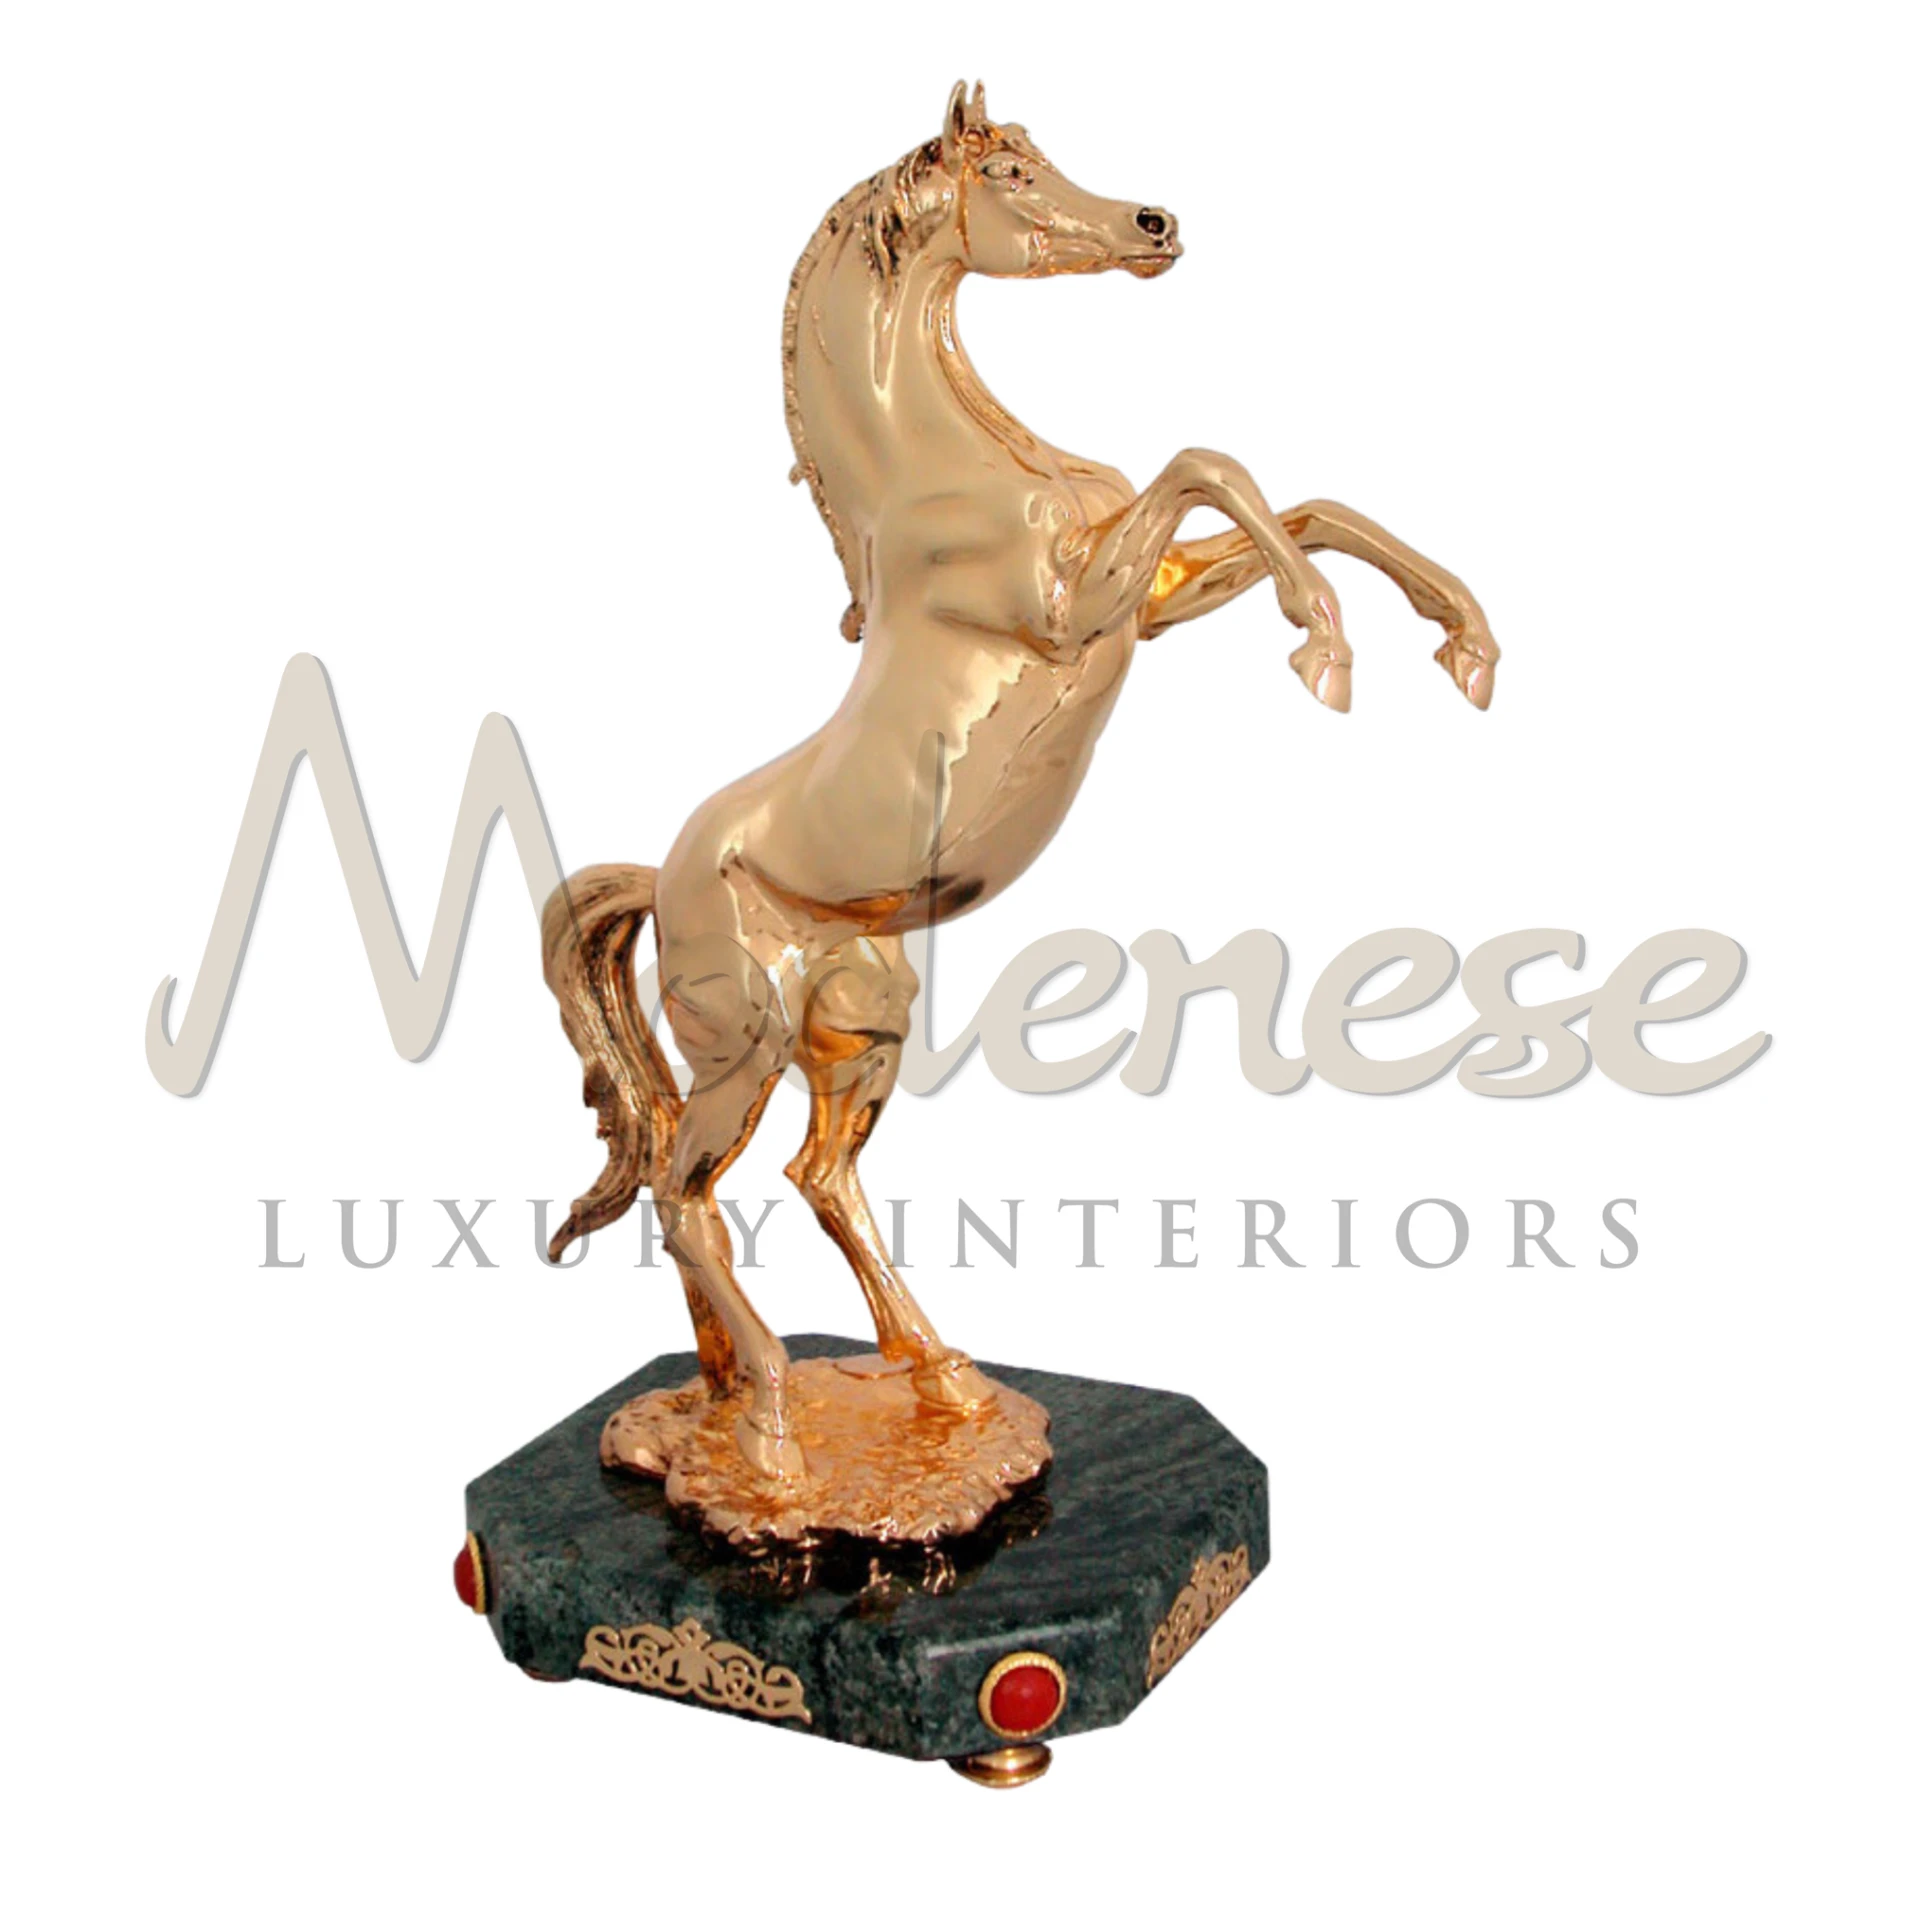 Royal Gold Horse in various artistic forms, featuring intricate details and ornamental design, ideal for enriching luxury interiors.